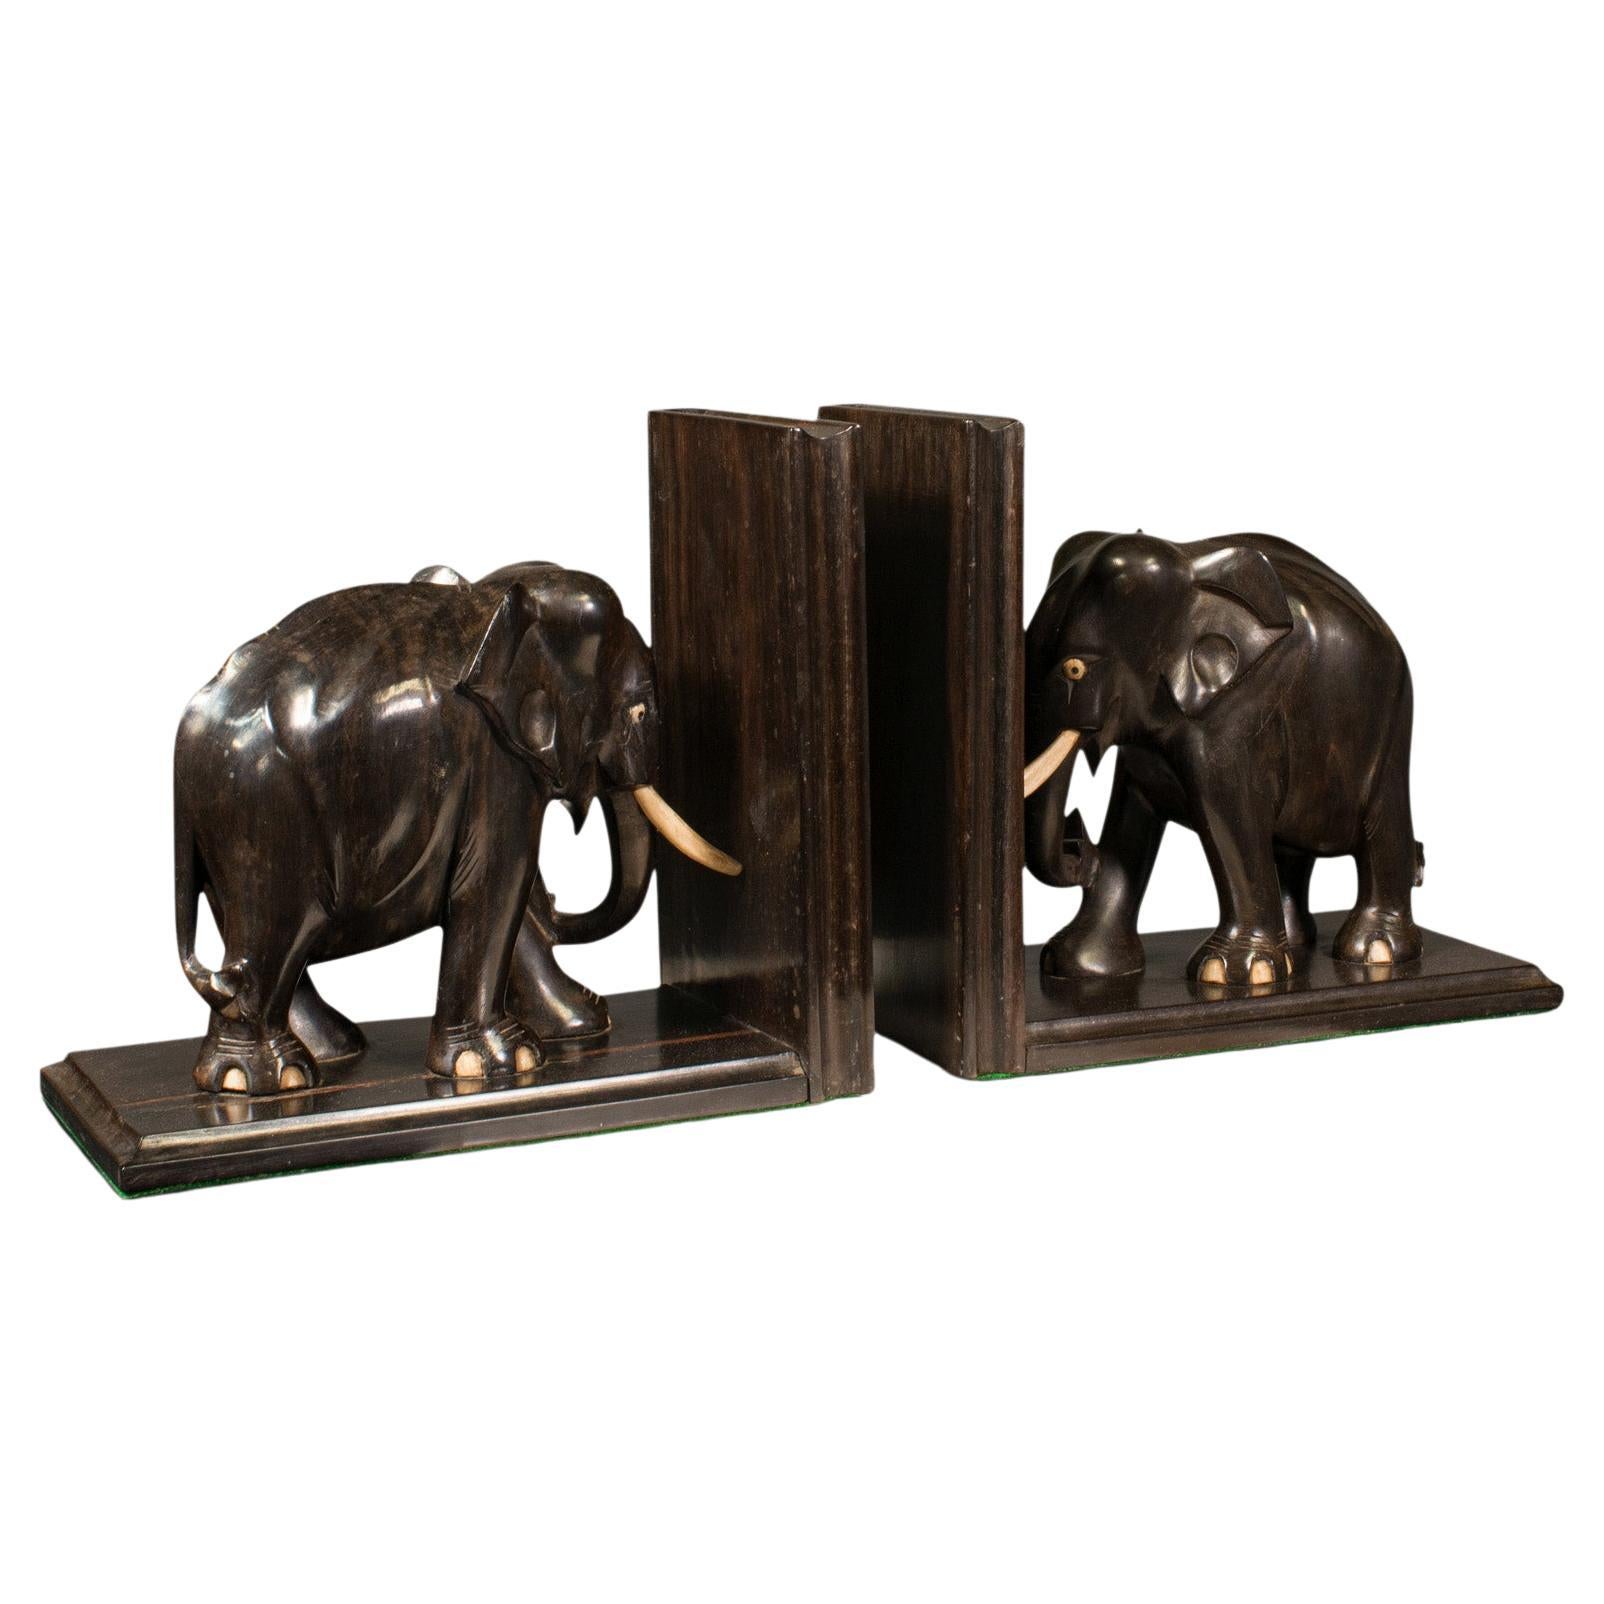 Pair of Antique Elephant Bookends, Anglo Indian, Ebony, Decorative, Book Rest